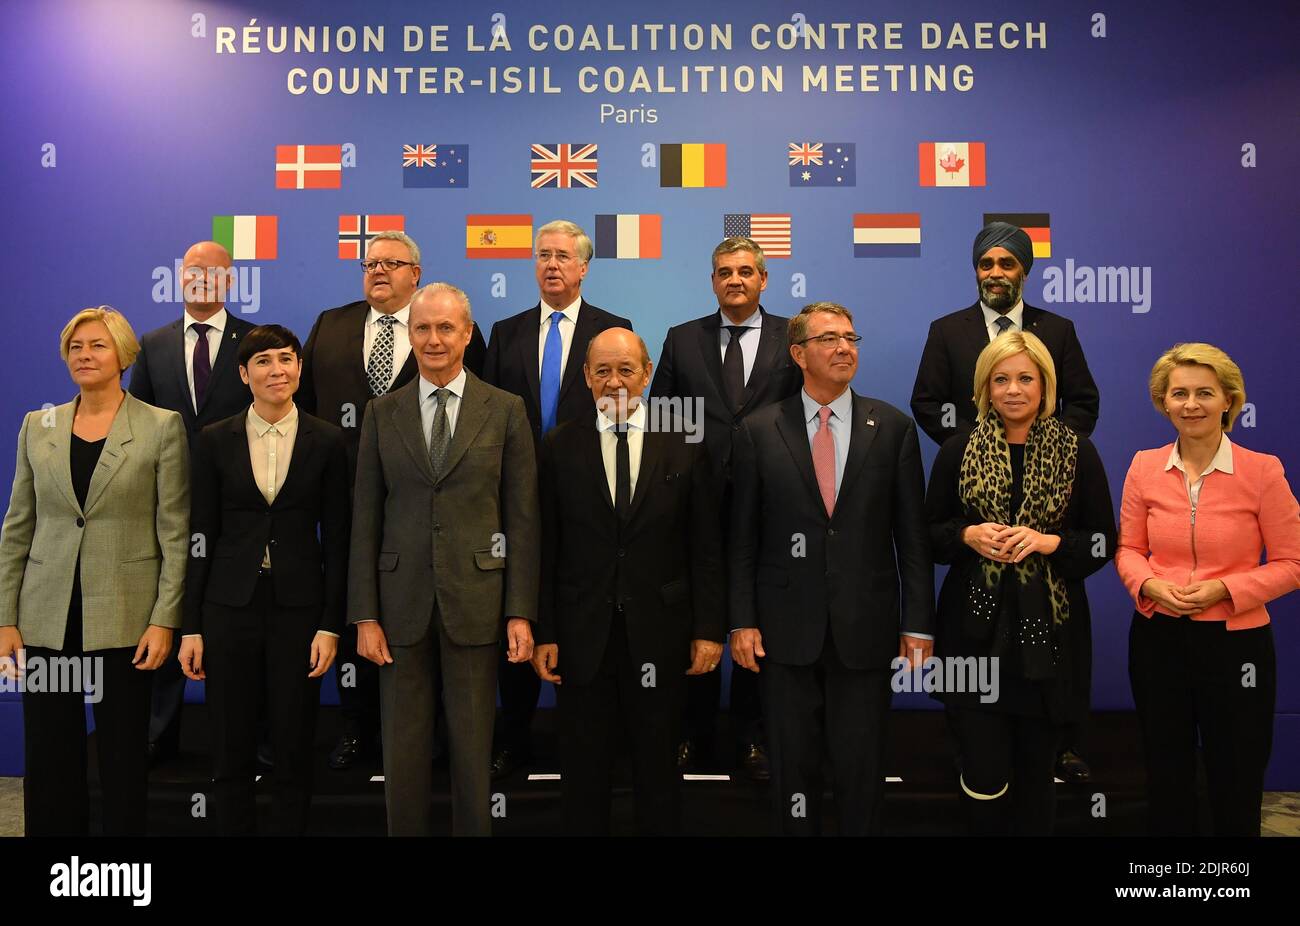 French Minister of Defence Jean-Yves Le Drian poses for a family photo with the Defence Ministers of the Coalition in Iraq and Syria, Ashton Carter (USA), Michael Fallon (UK), Jeanine Hennis-Plasschaert (Netherlands), Marise Payne (Australia), Roberta Pinotti (Italy), Ursula Von Der Leyen (Germany), Pedro Morenes (Spain), Peter Christensen (Denmark), Ine Marie Eriksen Soreide (Norway), Steven Vandeput (Belgium), Gerry Brownlee (New Zealand) and Harjit Sajjan (Canada), during the opening of a Counter-ISIL Coalition Meeting held at the French Ministry of Defence's headquarters in Paris, France o Stock Photo